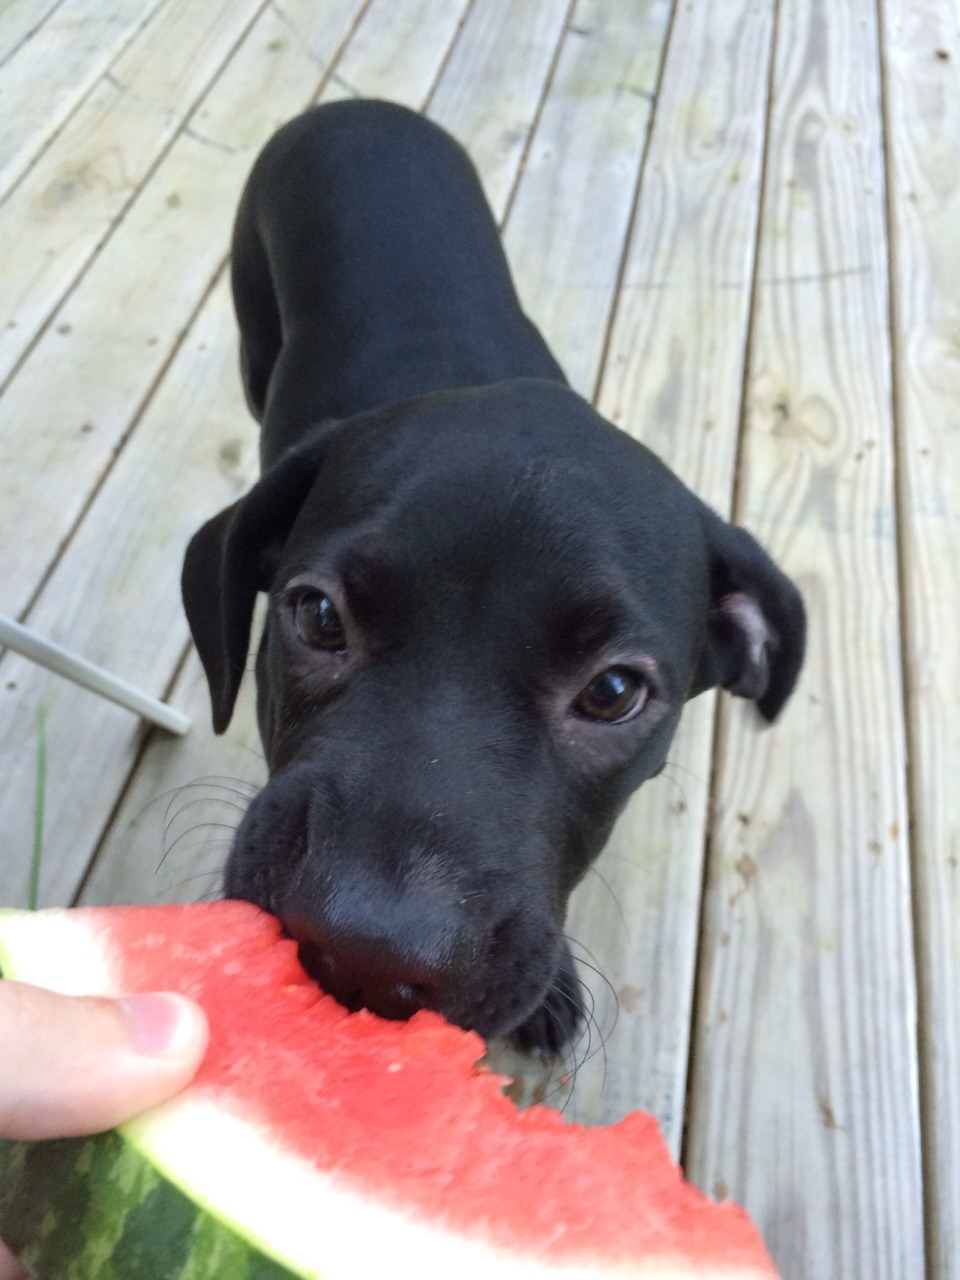 babybluesuv:  royonfire:  I present to you a puppy eating watermelon.  I can’t